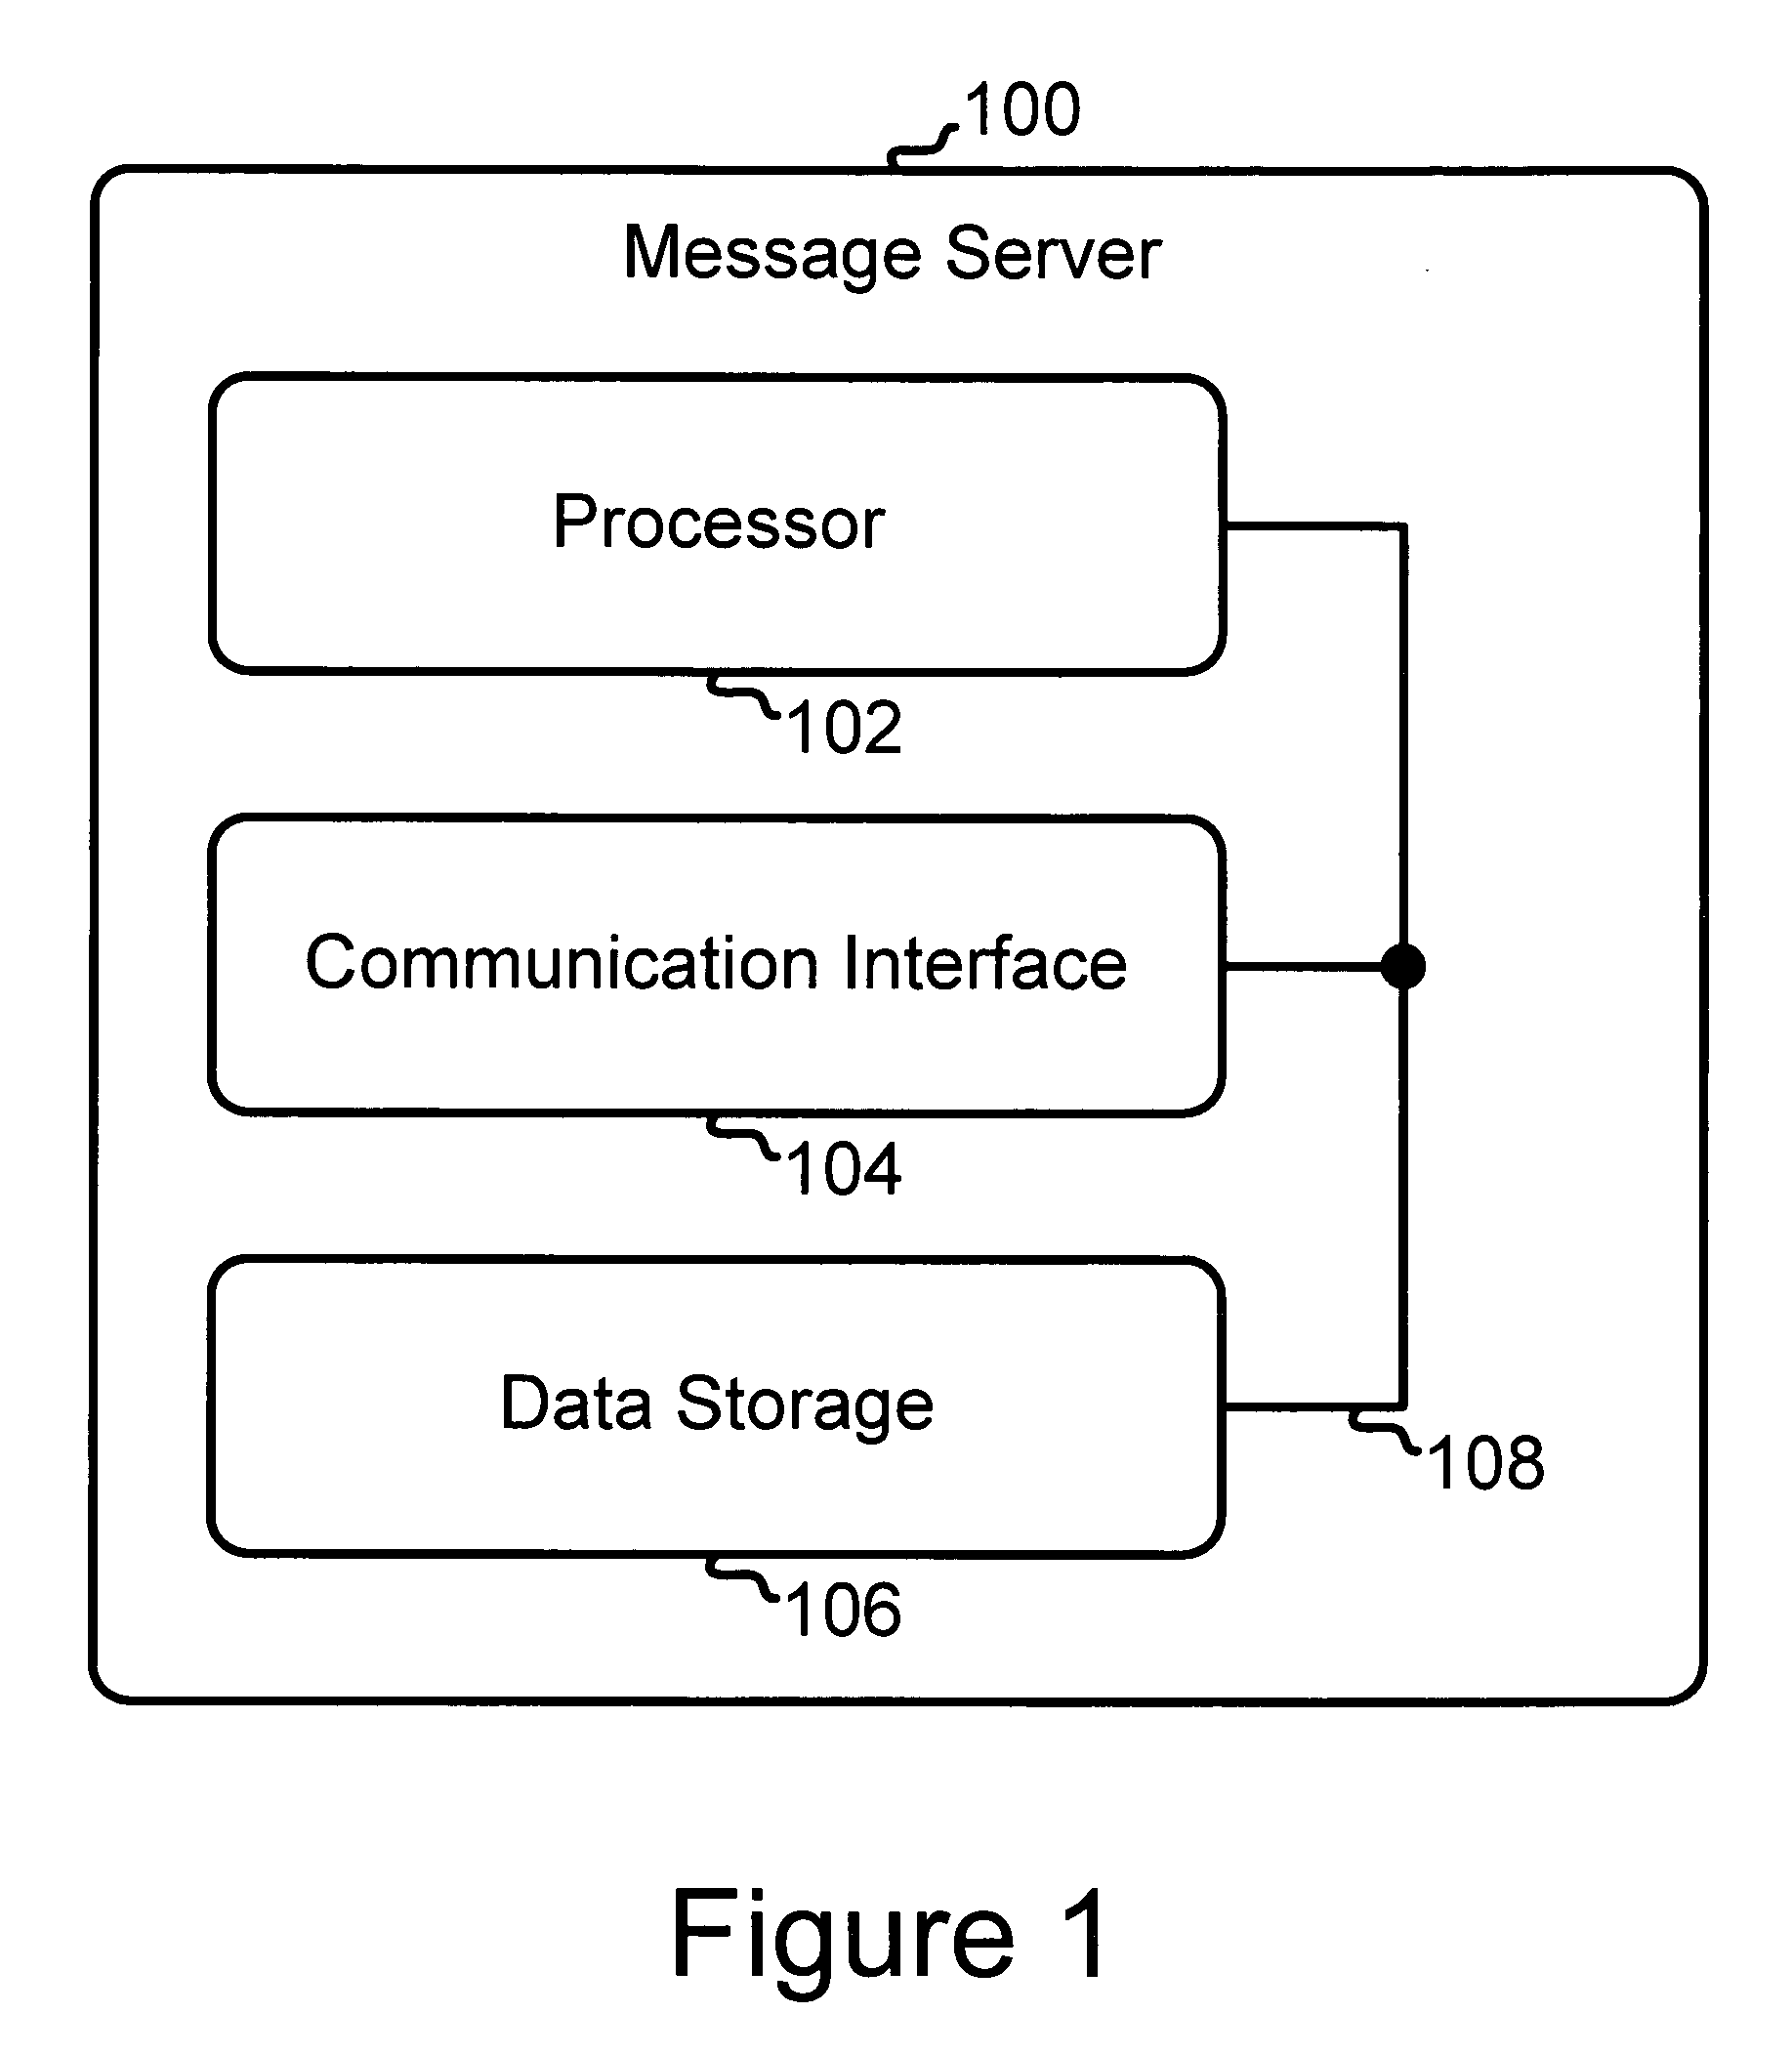 Method for offloading encryption and decryption of a message received at a message server to remote end devices